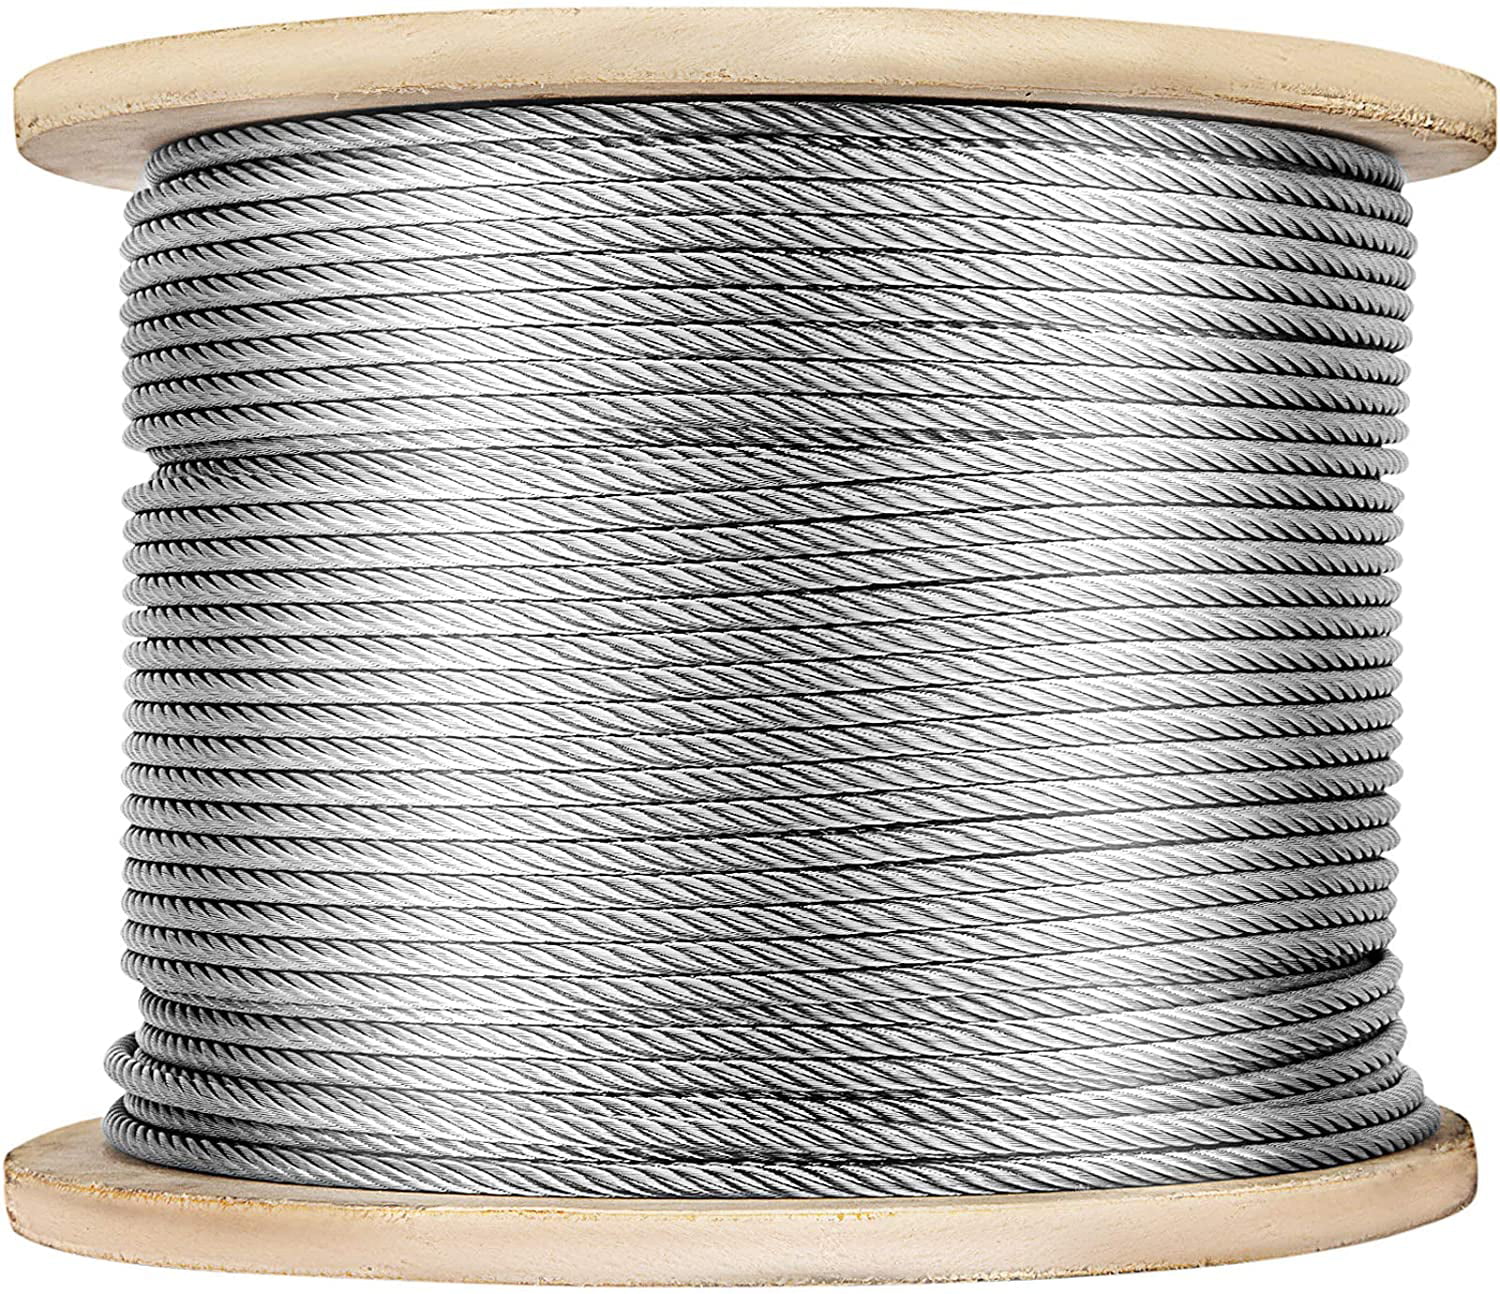 T316 1x19 Stainless Steel Wire 1/8" Cable Rail Wire Rope Aircraft Cable 500FT 